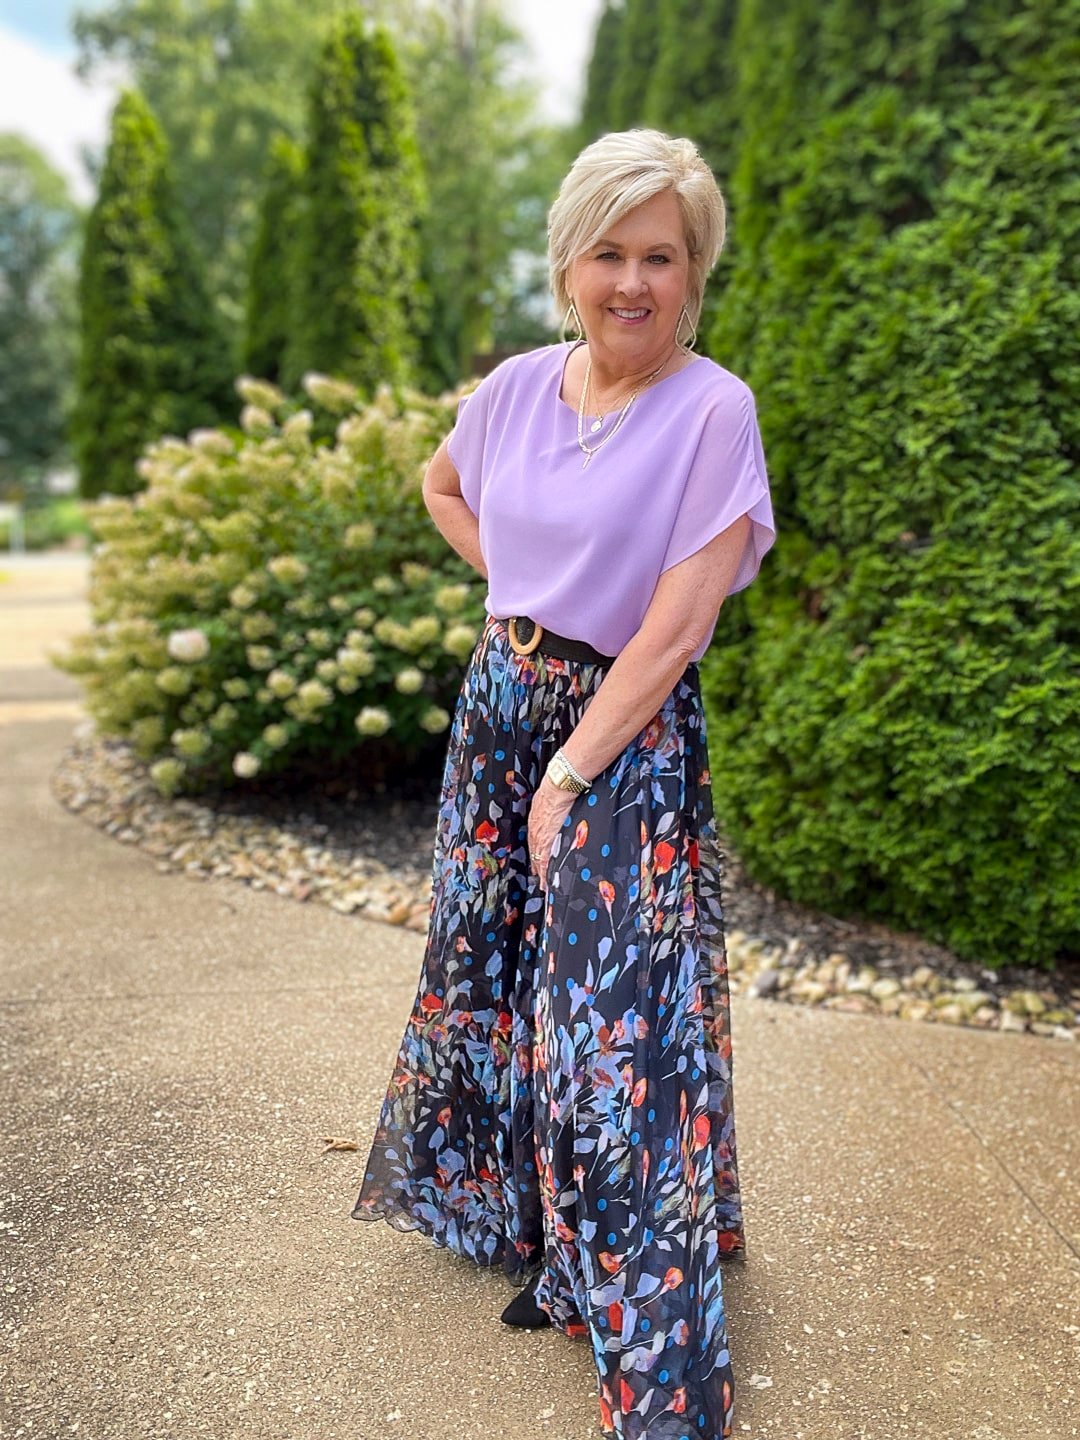 Over 40 Fashion Blogger, Tania Stephens is styling a floral chiffon skirt for a fall wedding4